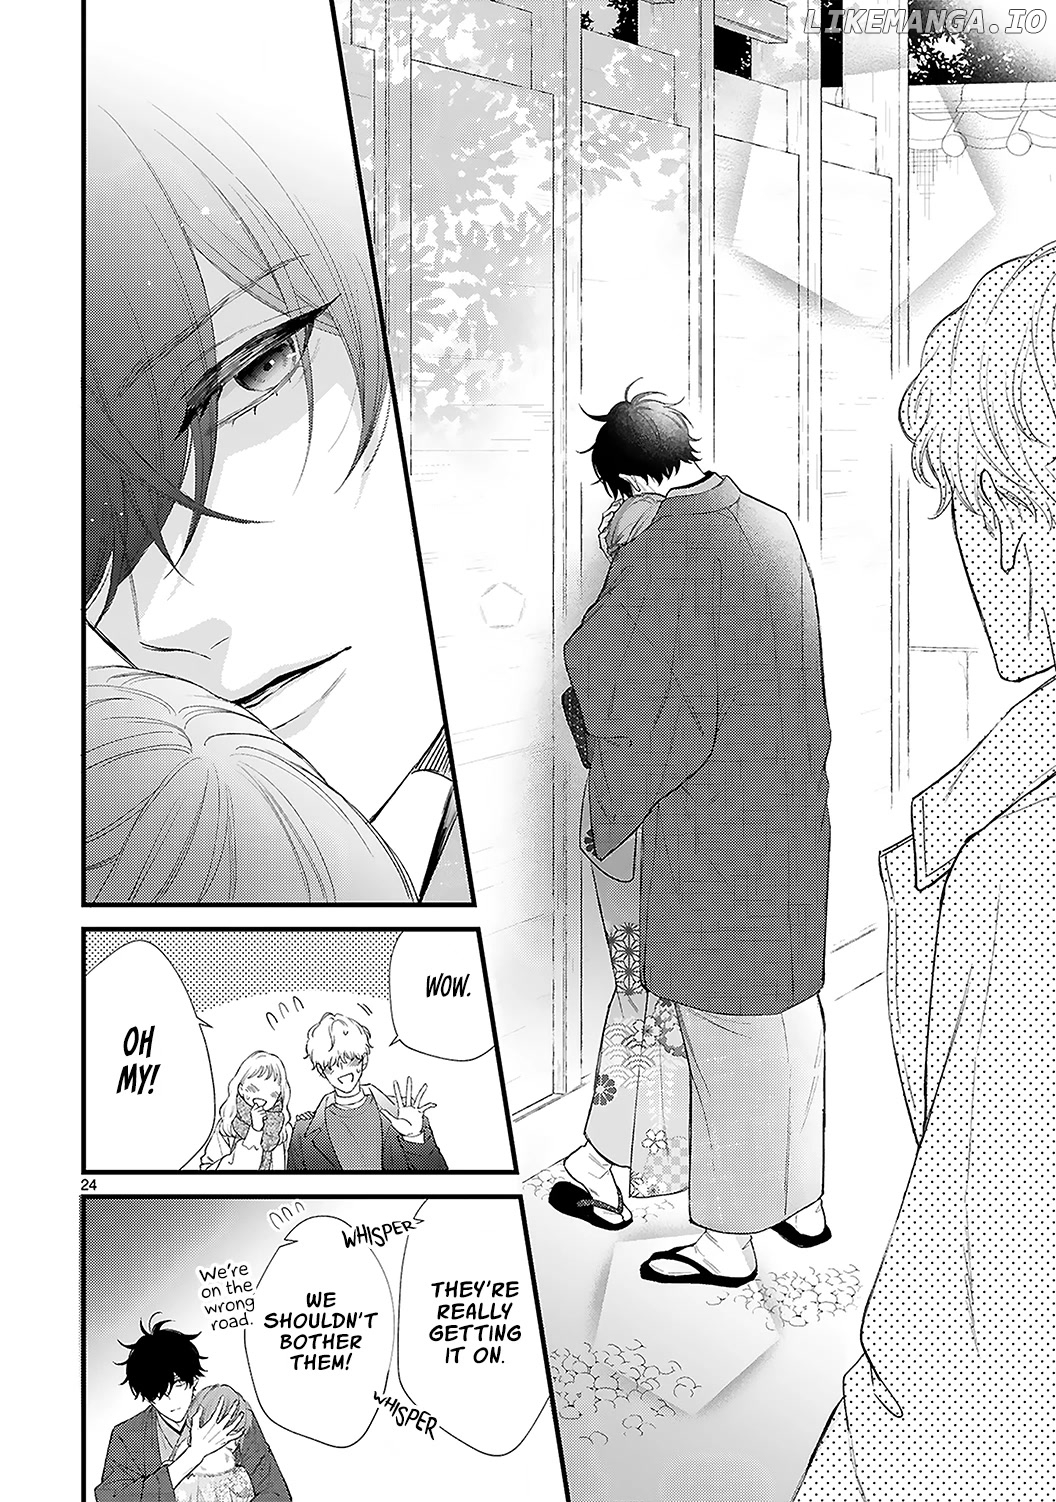 Kurosaki-San's Single-Minded Love Is Unstoppable chapter 11.2 - page 9